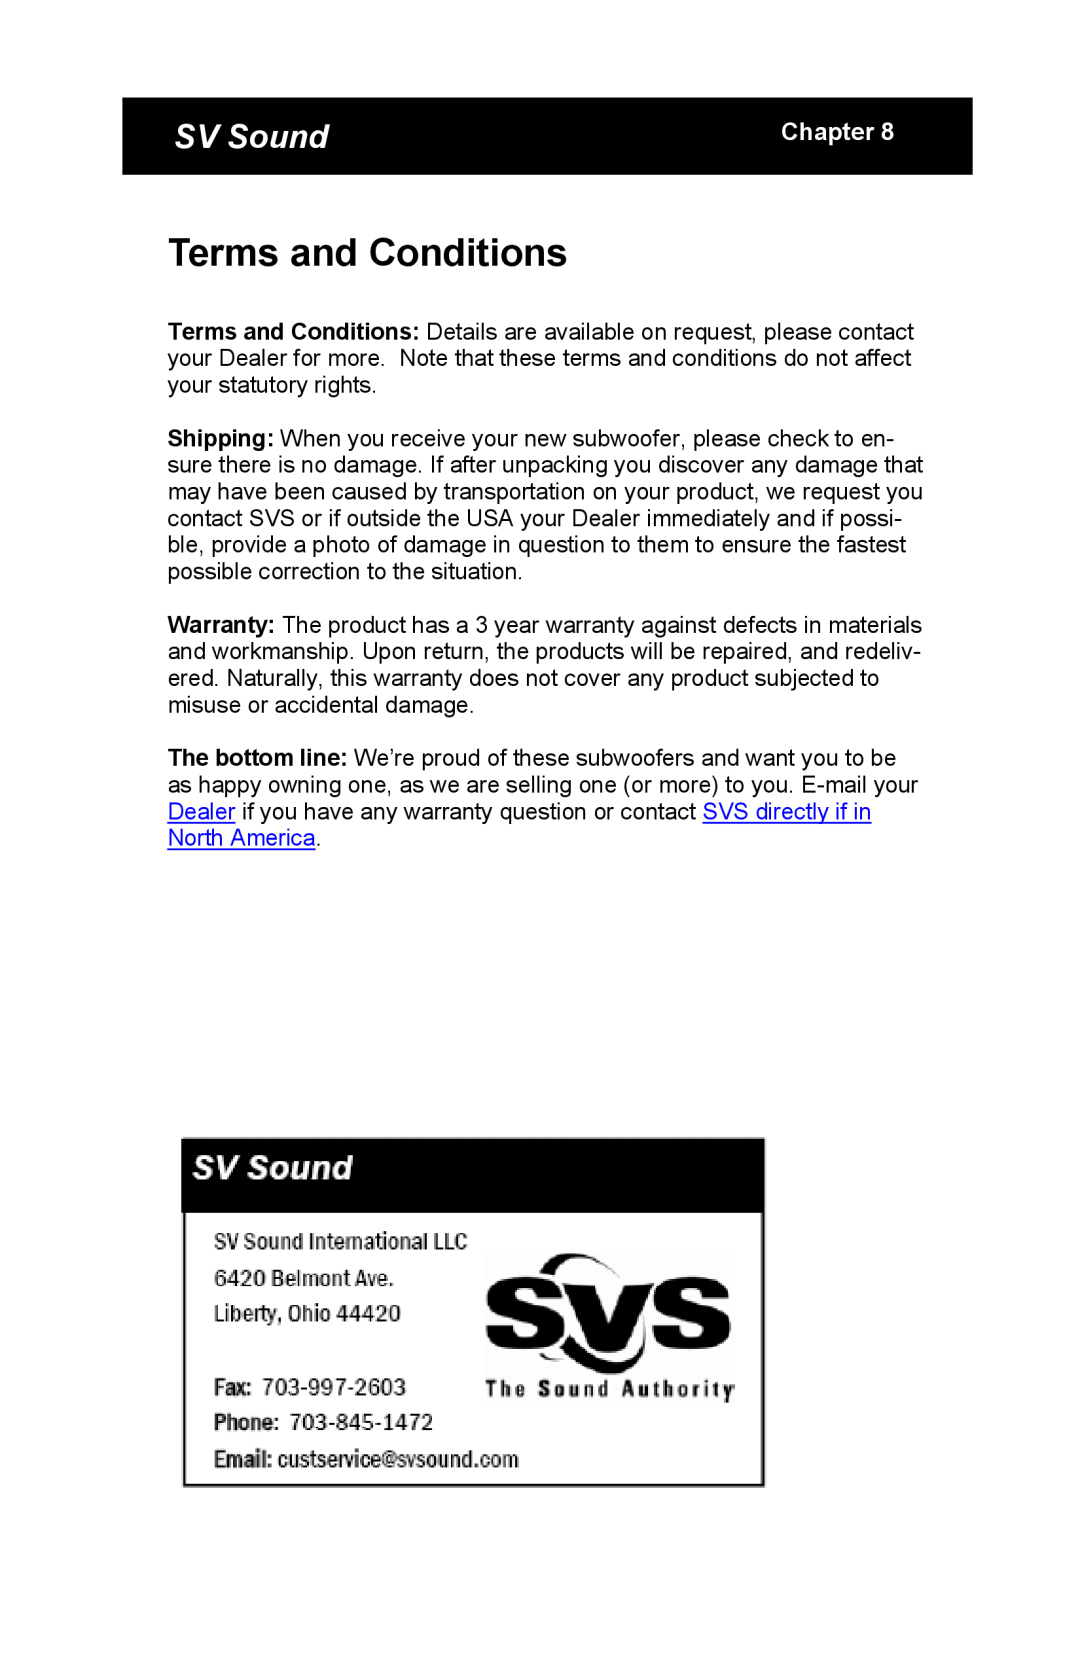 SV Sound PC12-NSD specifications Terms and Conditions, SV Sound, Chapter 